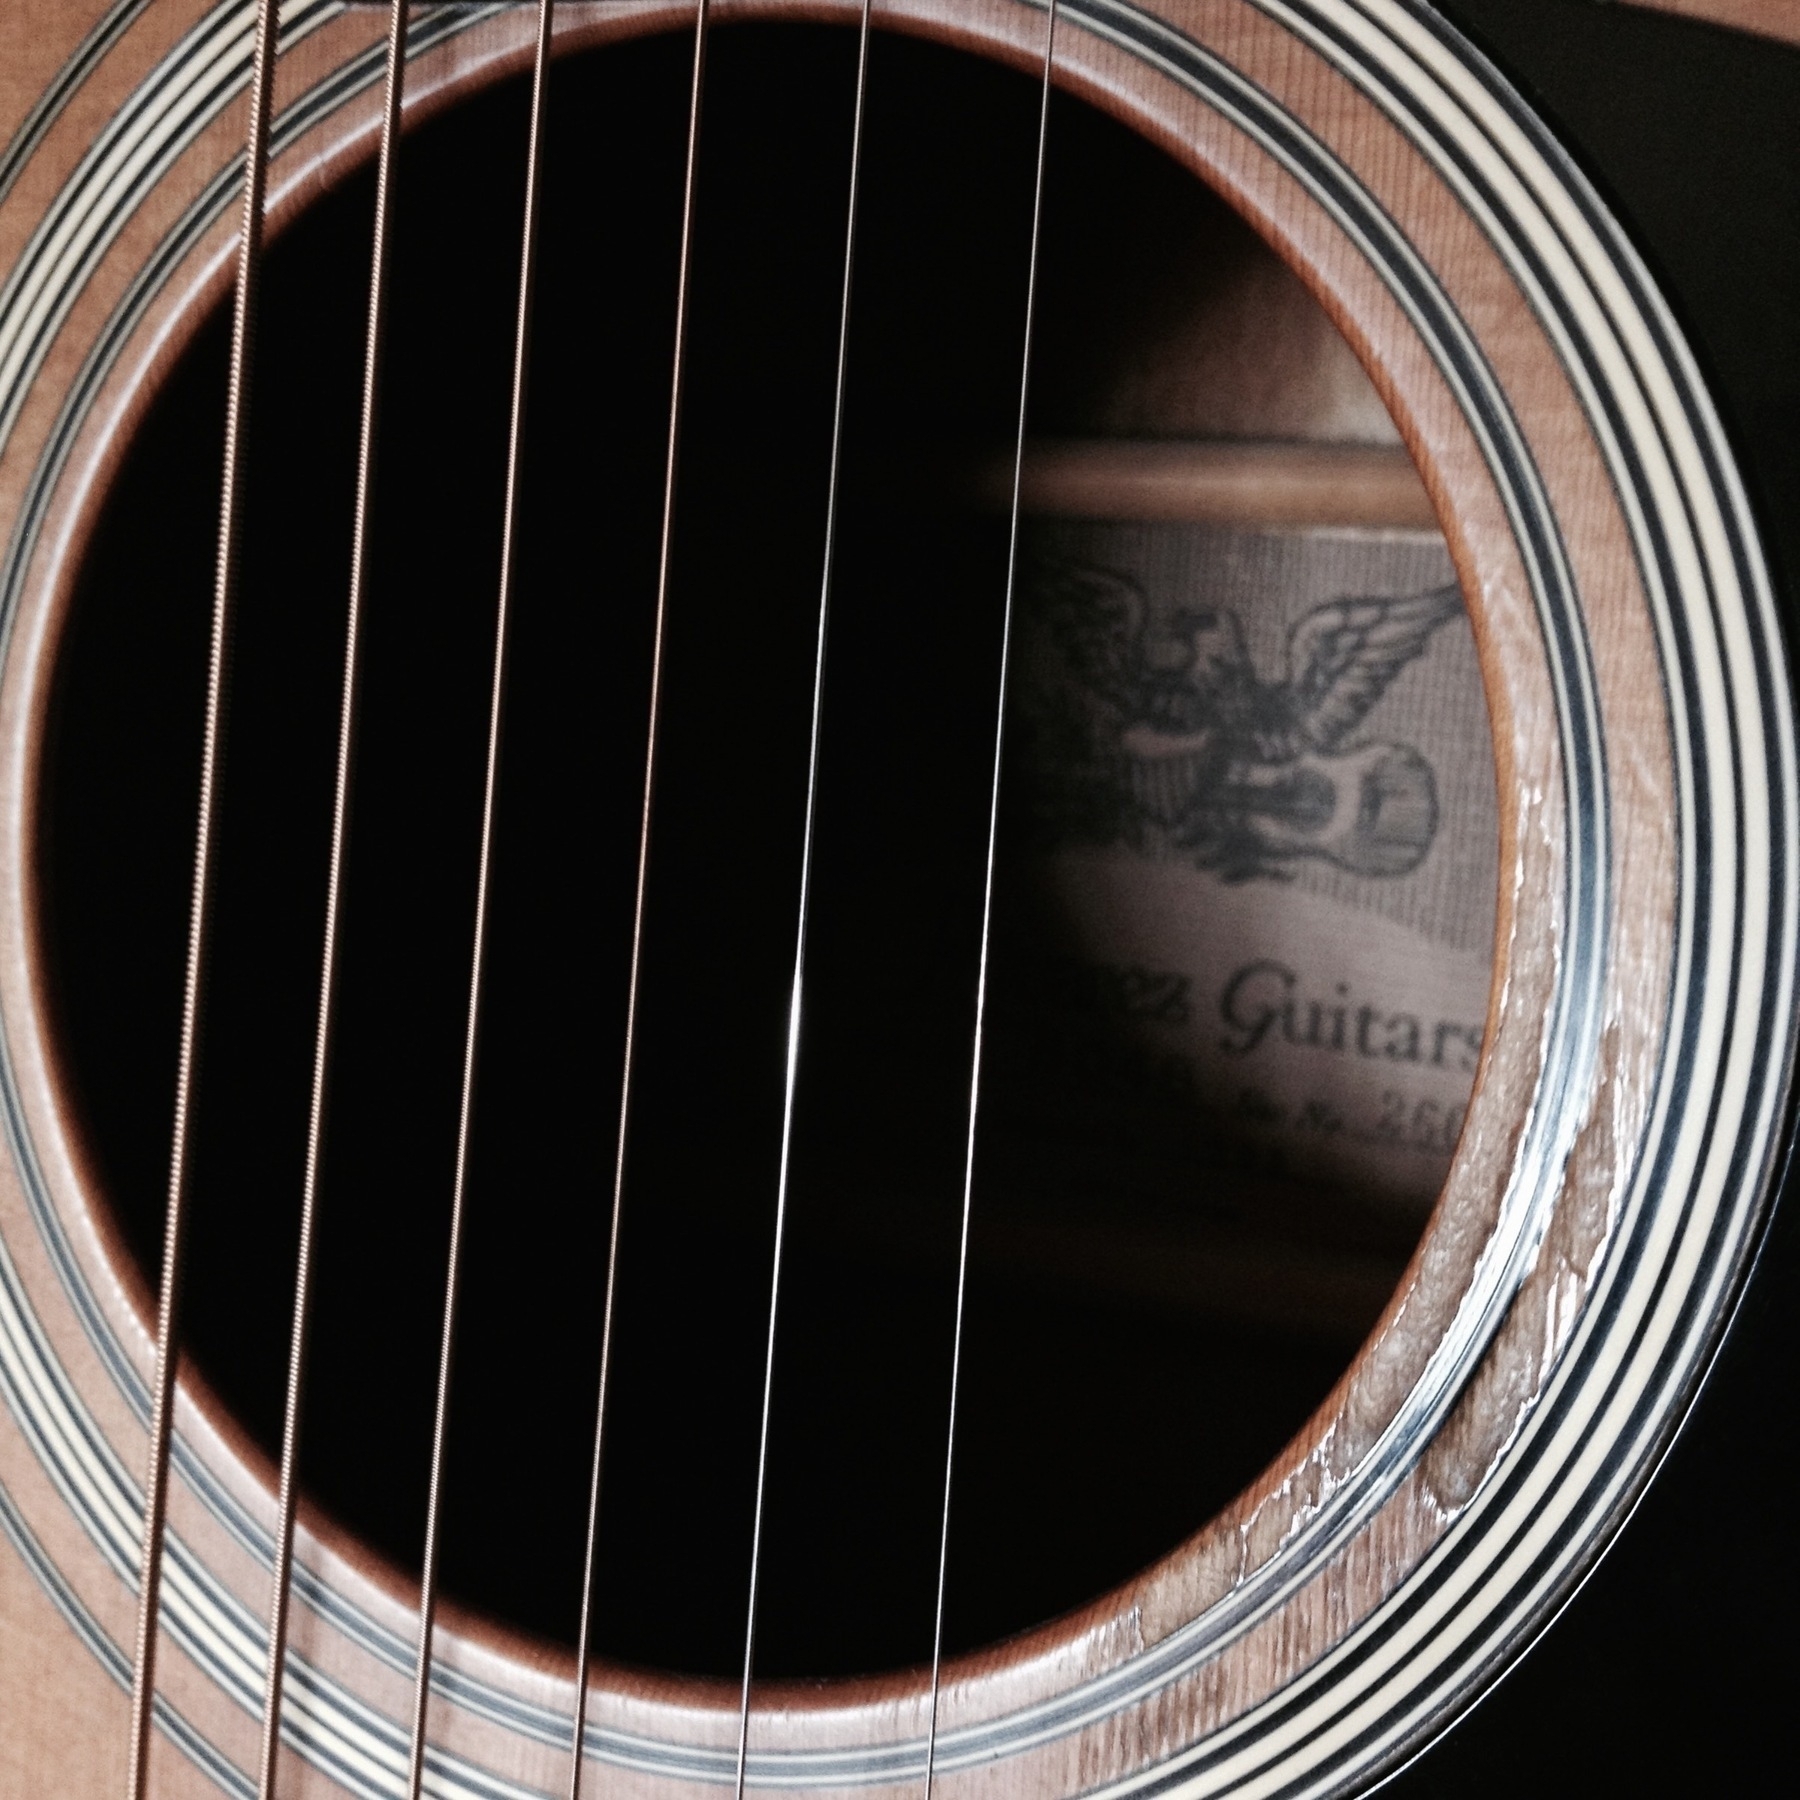 close-up on the sound hole of an Alvarez acoustic guitar, showing years of wear from strumming